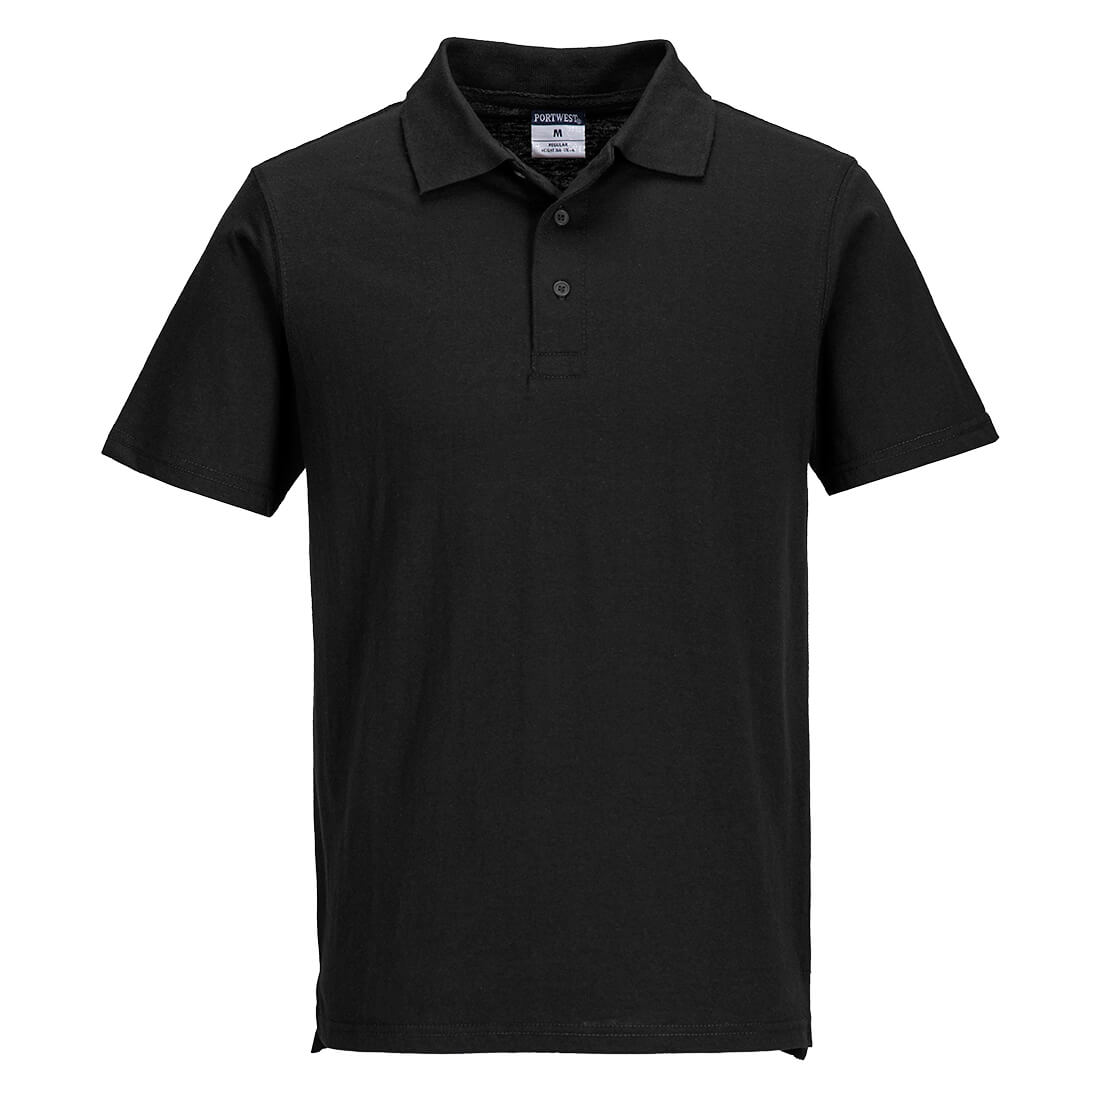 Portwest Lightweight Jersey Polo Shirt (48 in a box)